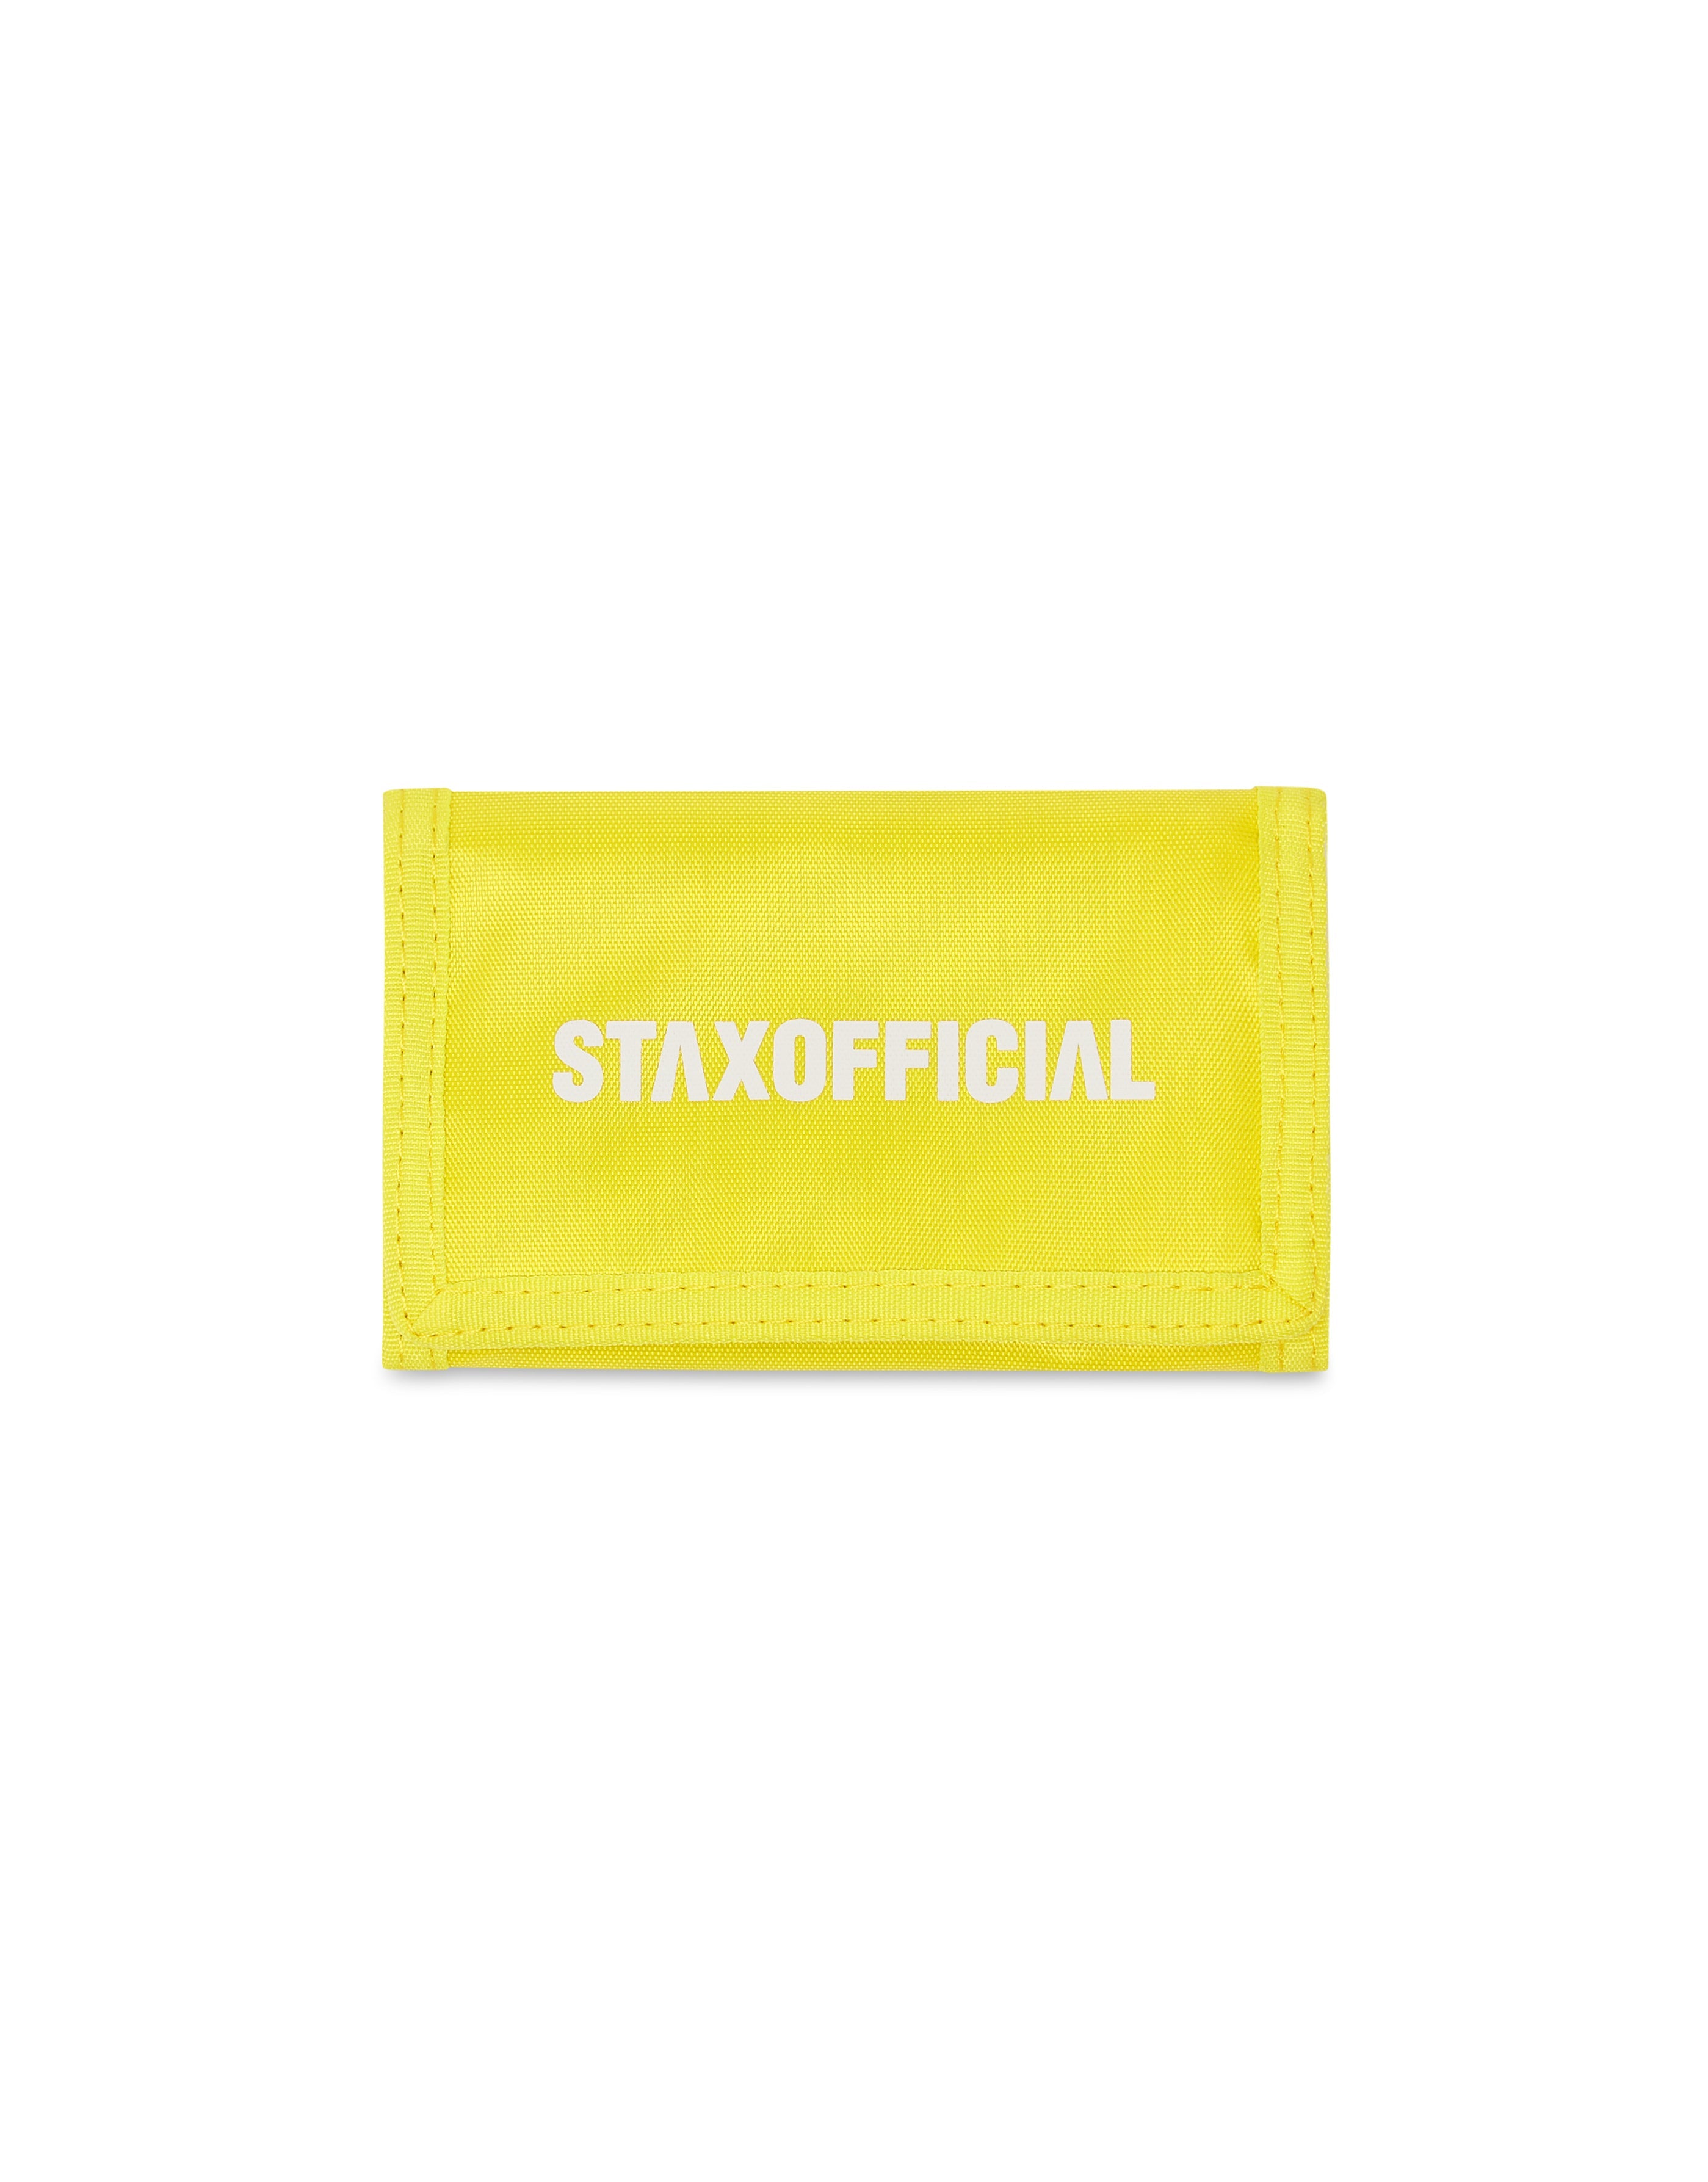 staxofficial-velcro-wallet-yellow